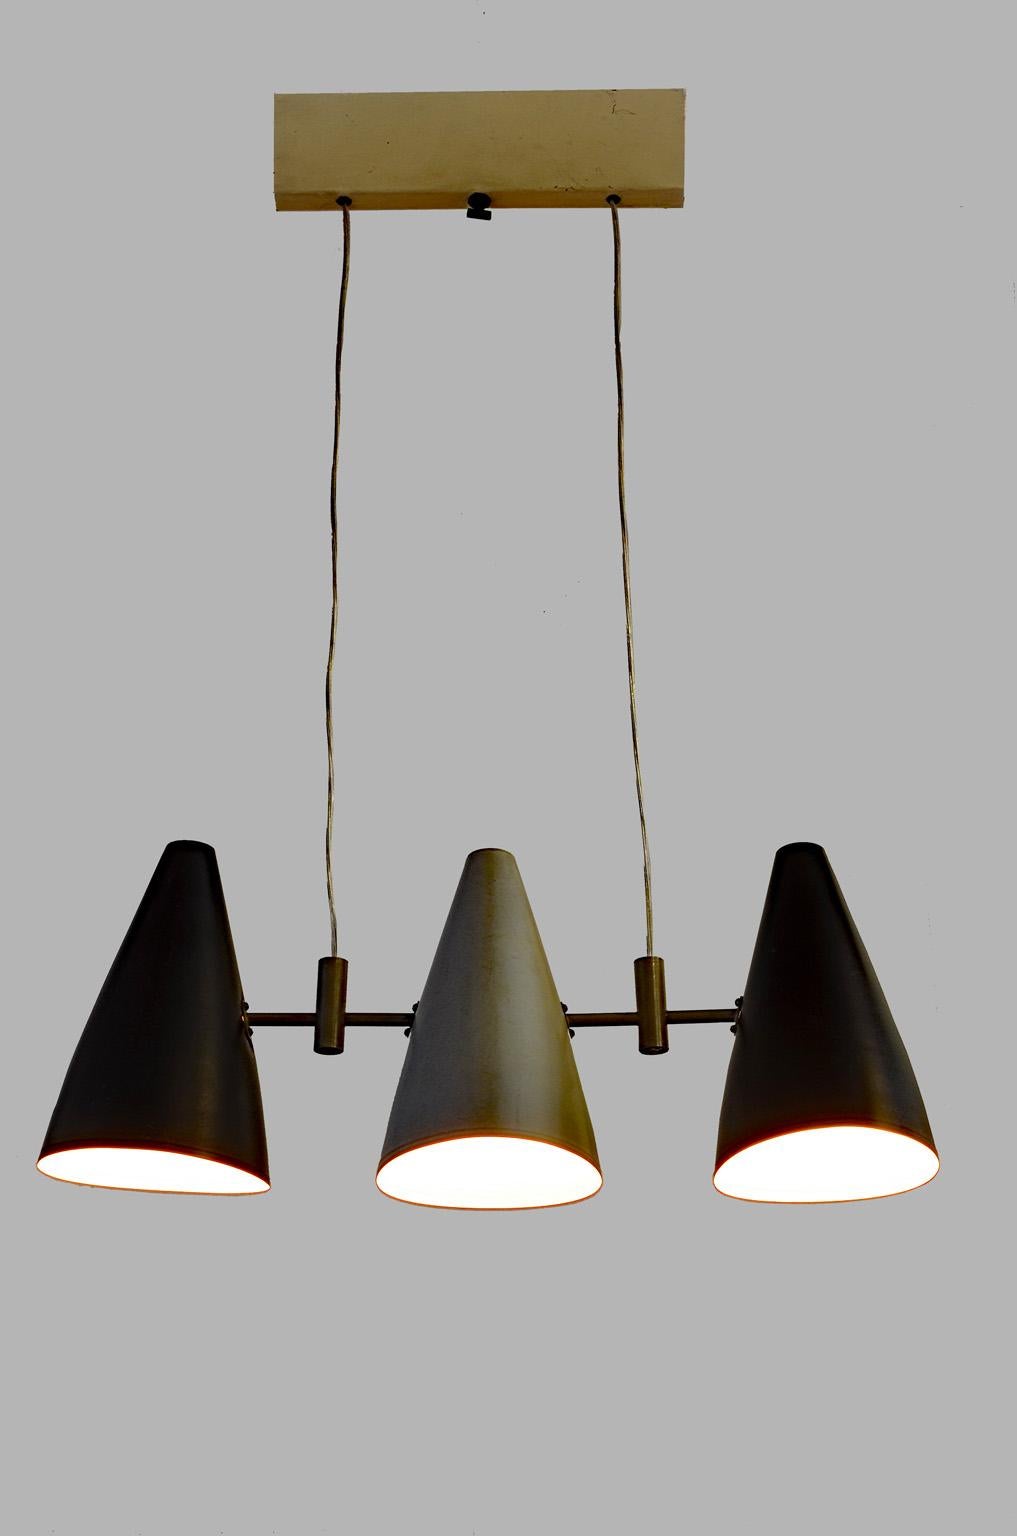 This Italian pendant lamp was manufactured in the 1950s. It is made from metal and features three lamp shades lacquered in black and gray.